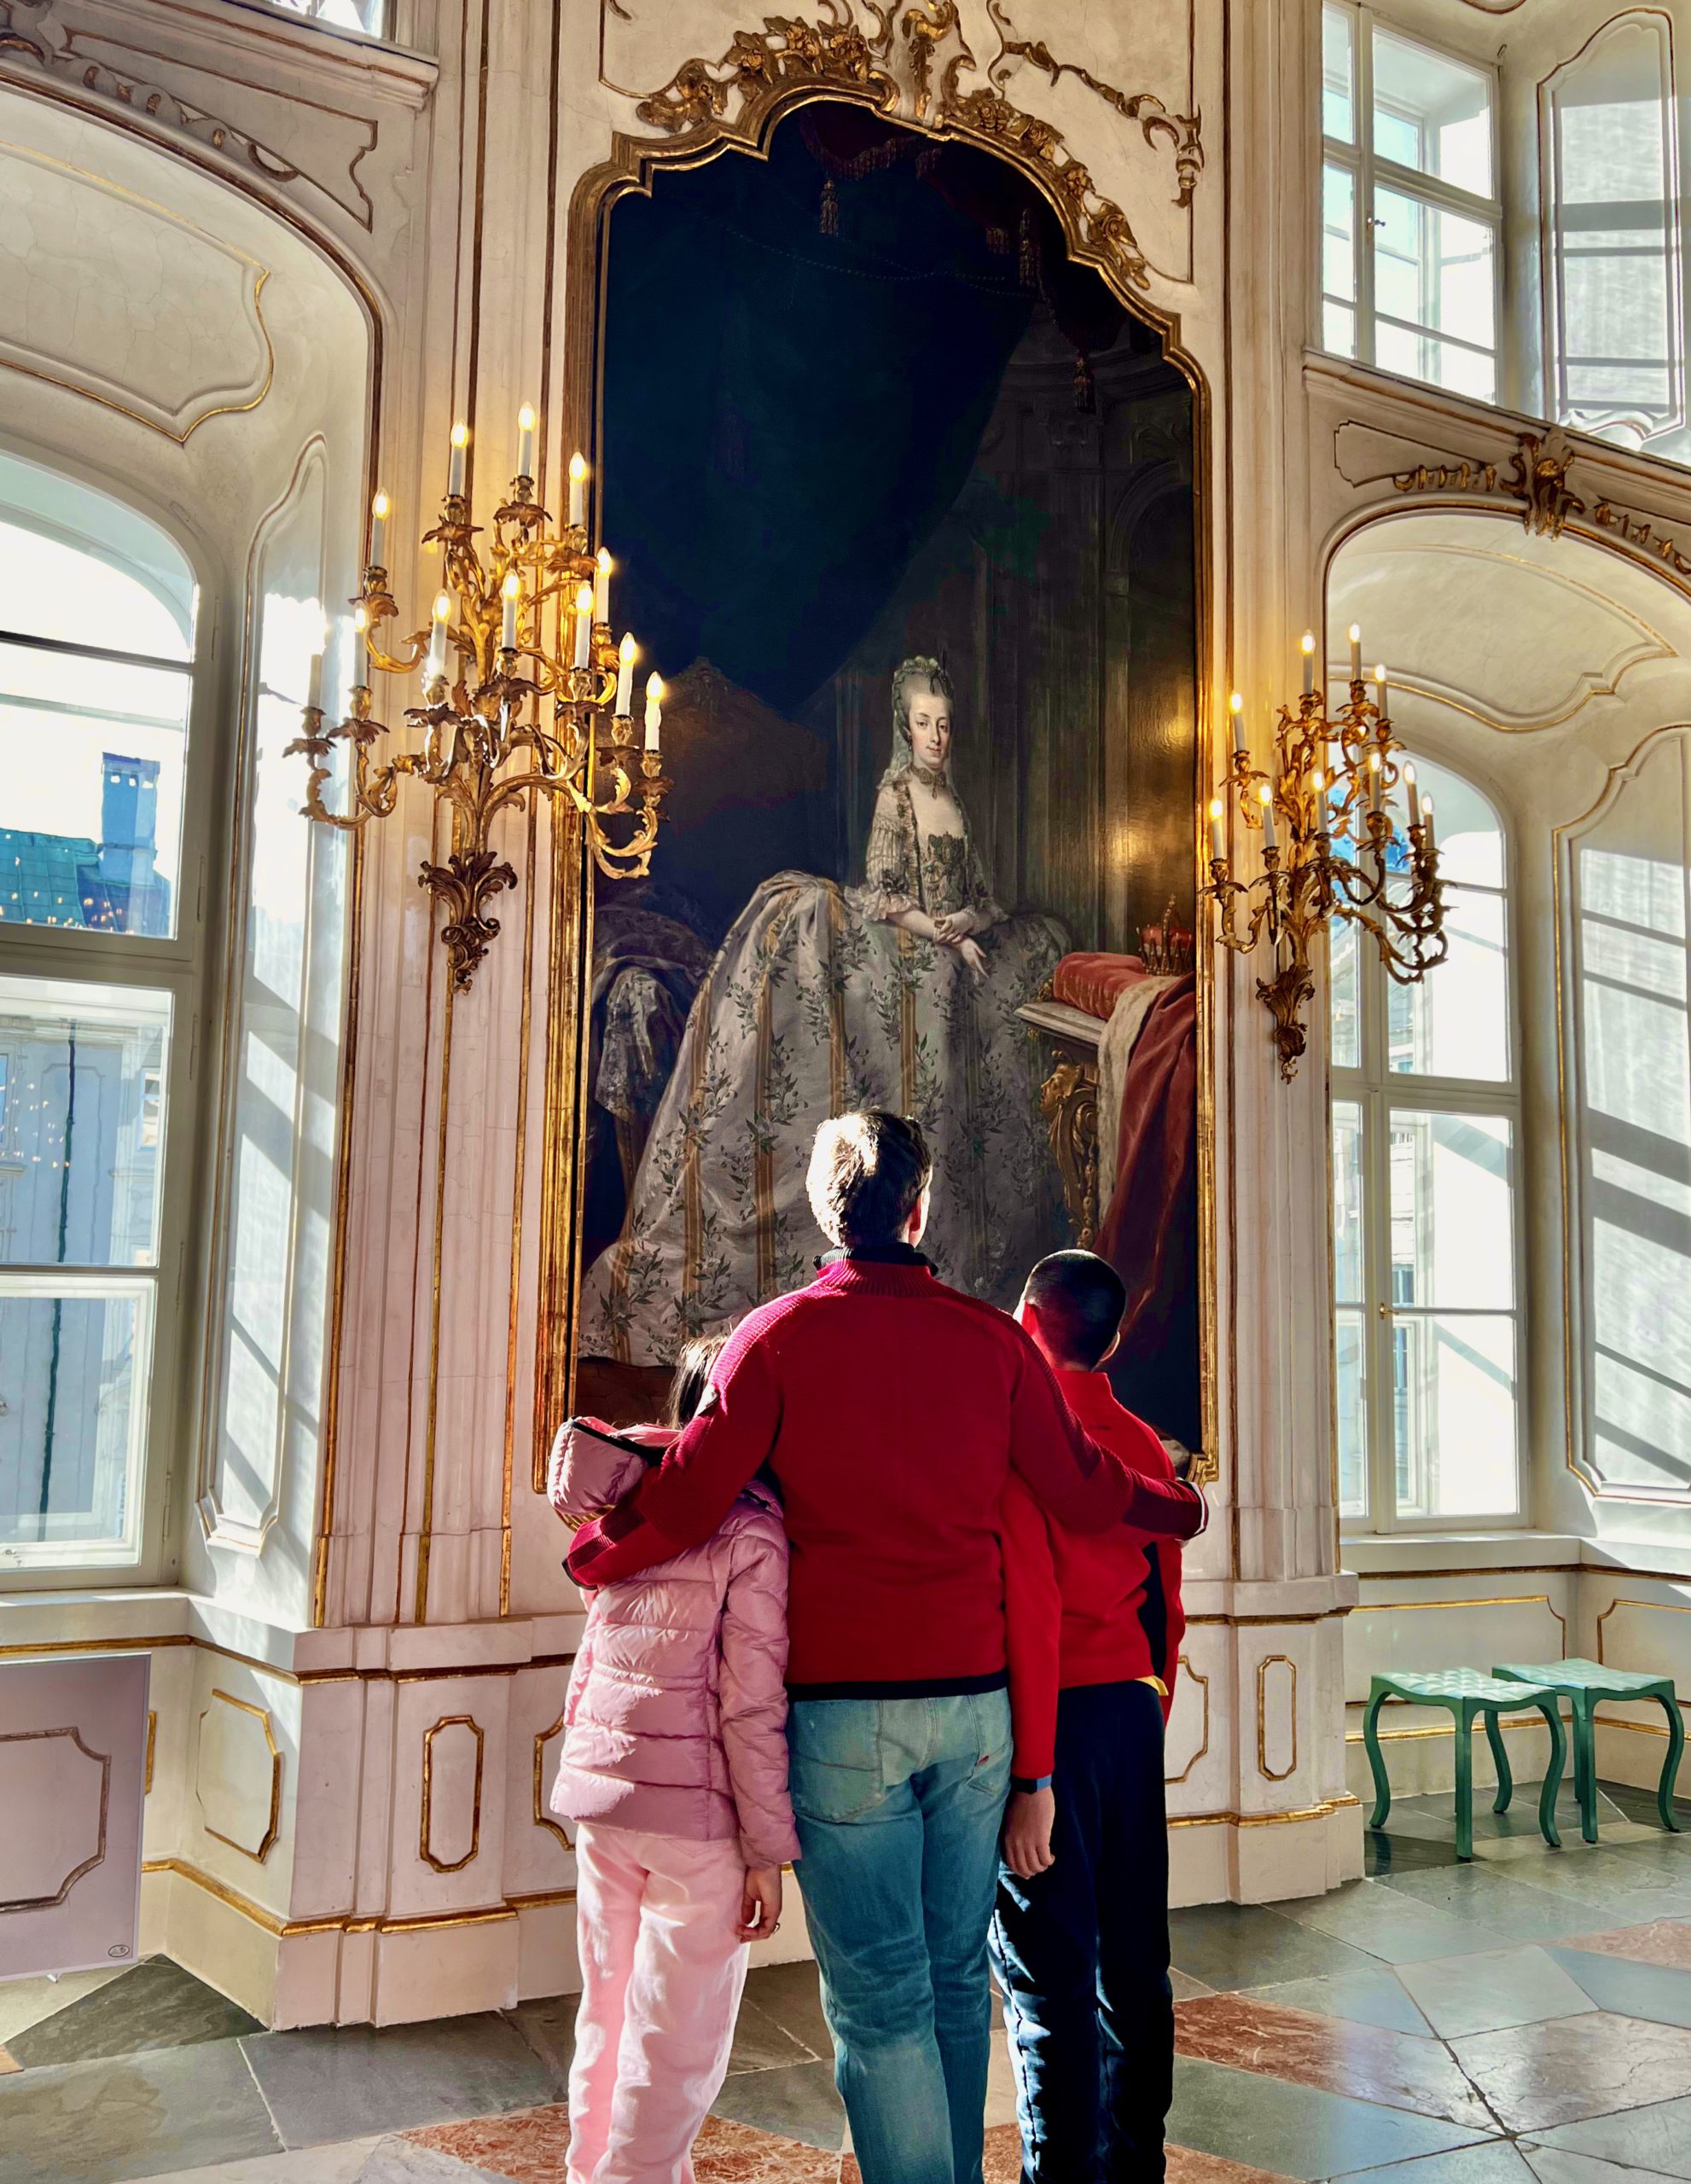 A dad and his two kids enjoy a large painting of a long-ago royal at the Imperial Palace.